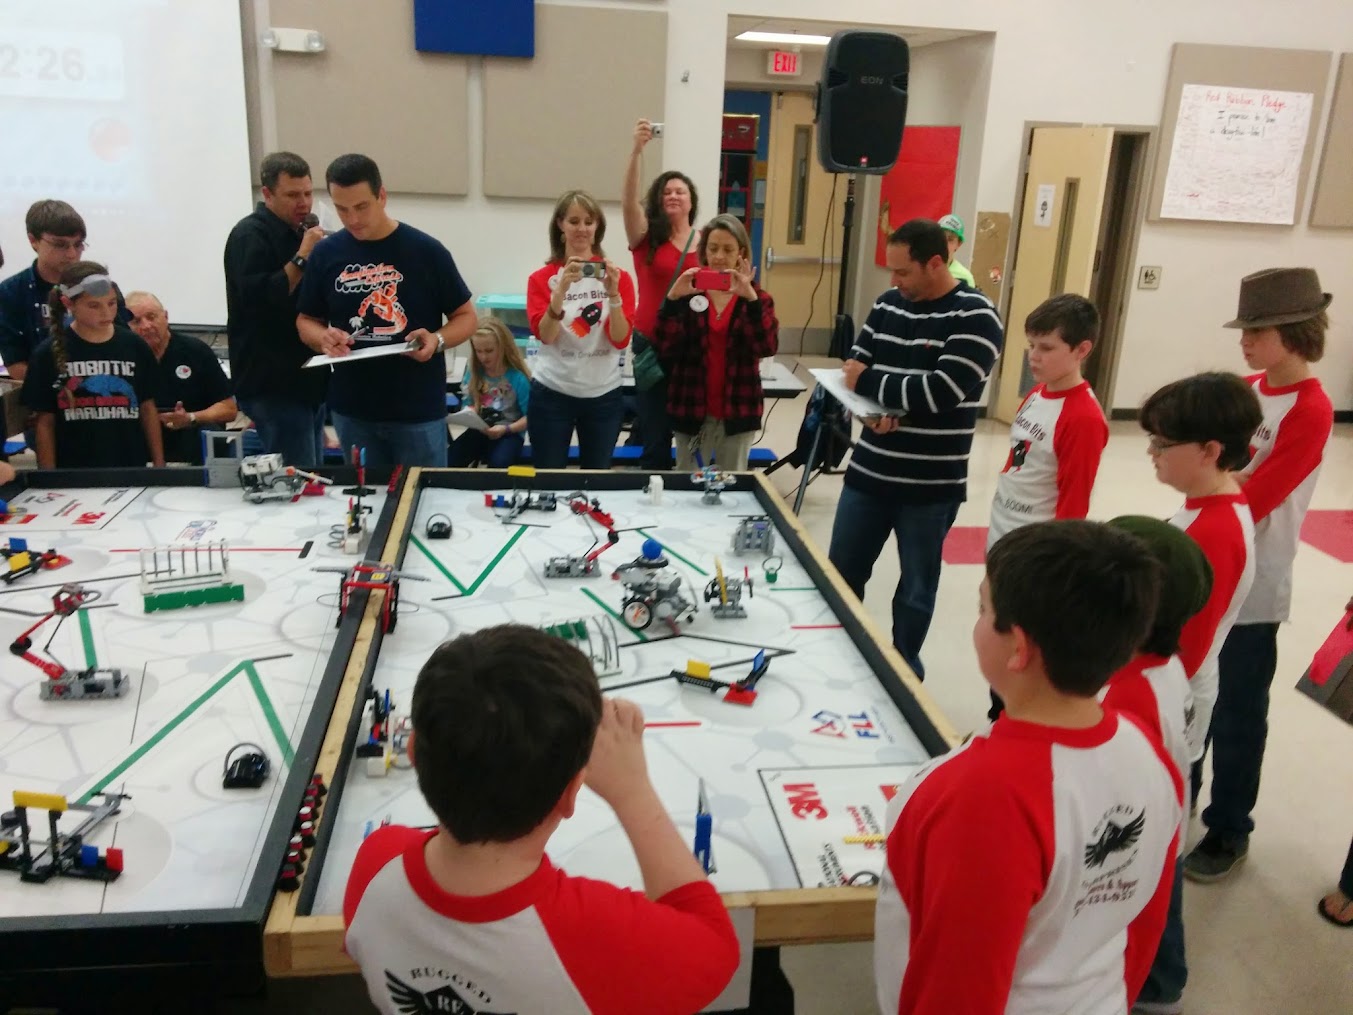 Lego Robots on the table during competition